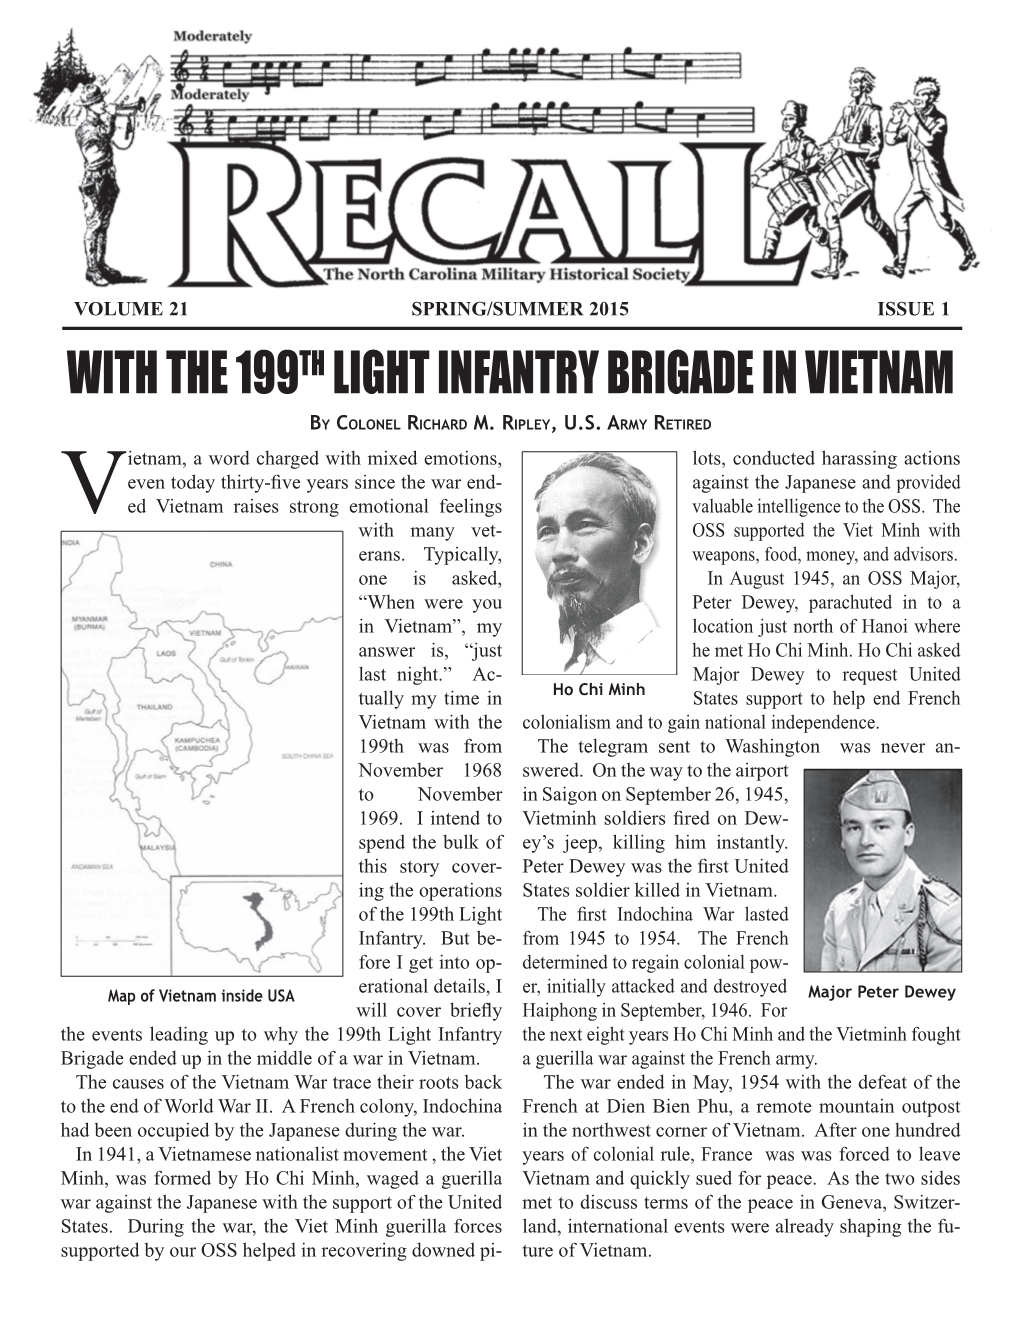 WITH the 199TH LIGHT INFANTRY BRIGADE in VIETNAM by Colonel Richard M